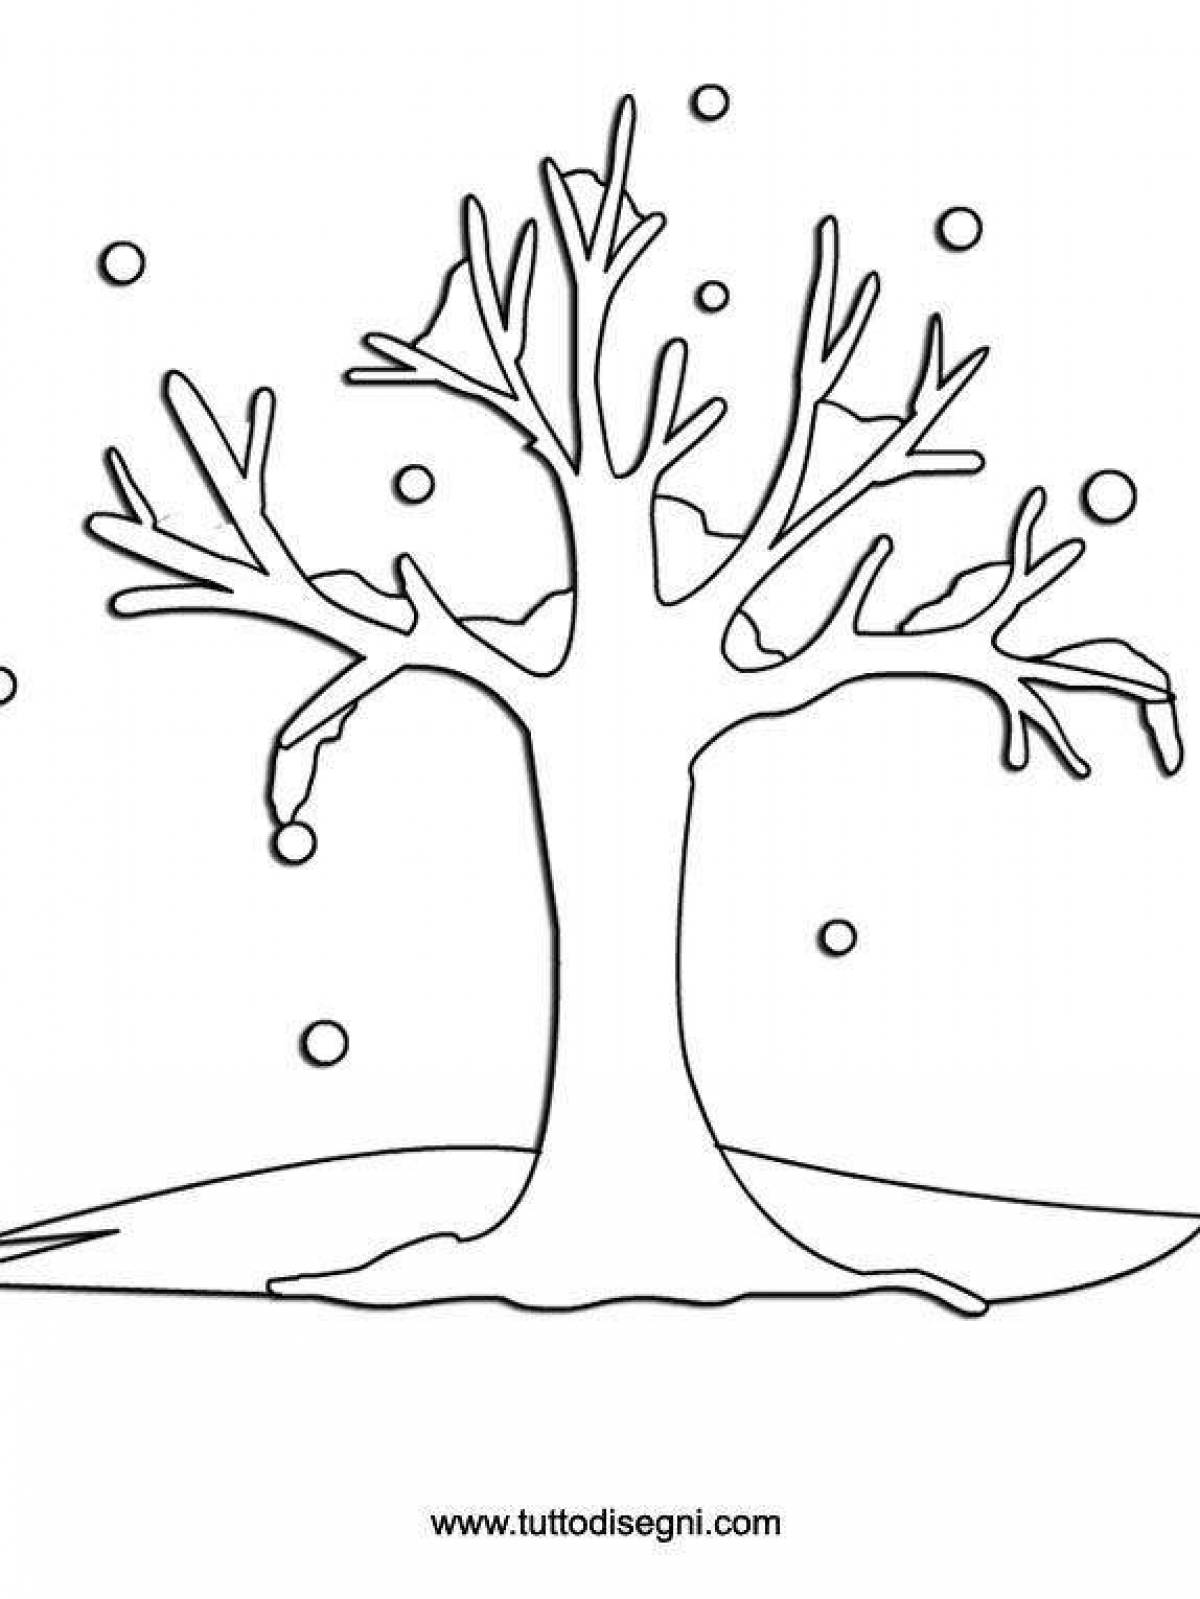 Coloring page wild winter tree